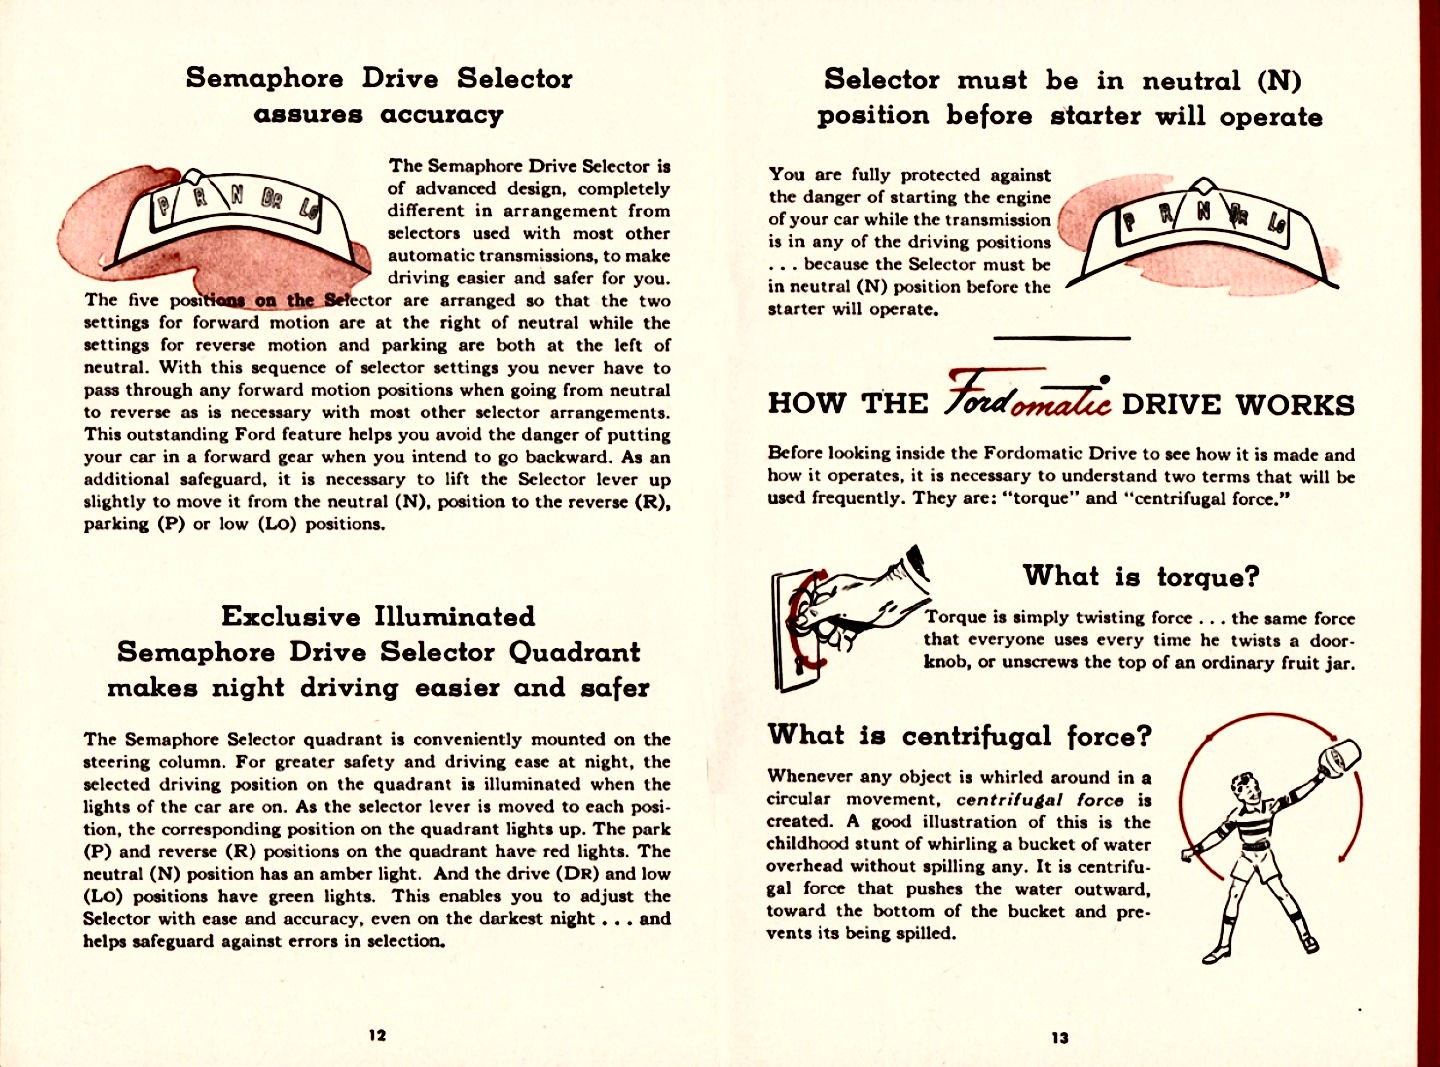 1951_Fordomatic_Booklet-12-13